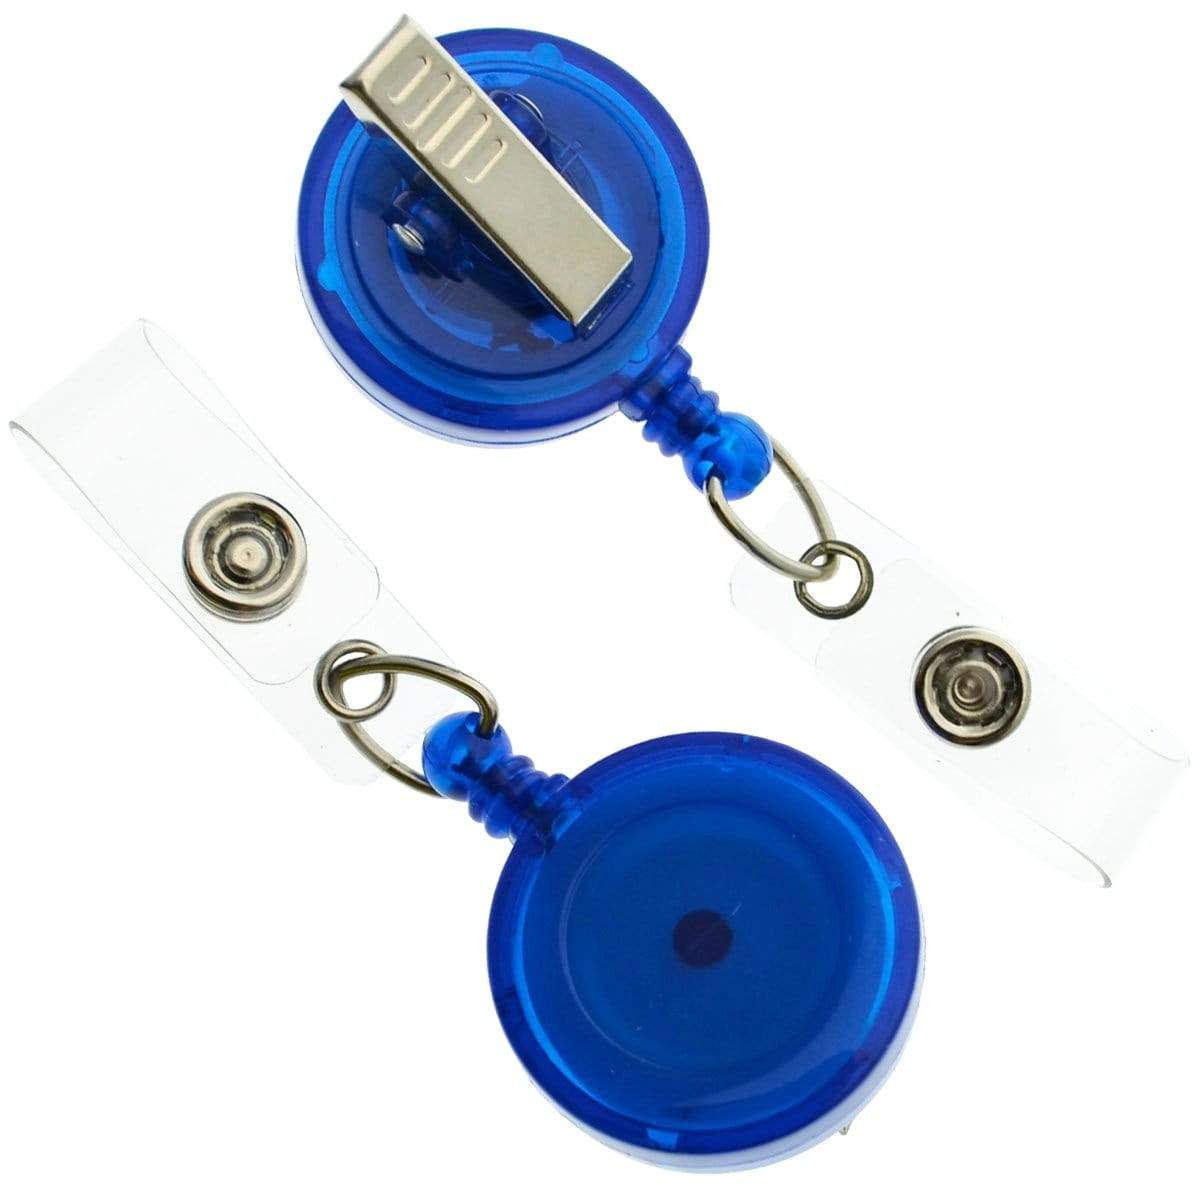 Translucent Badge Reel With Swivel Clip And Vinyl Strap Clip (P/N  2120-7621) and more Swivel Badge Reels at